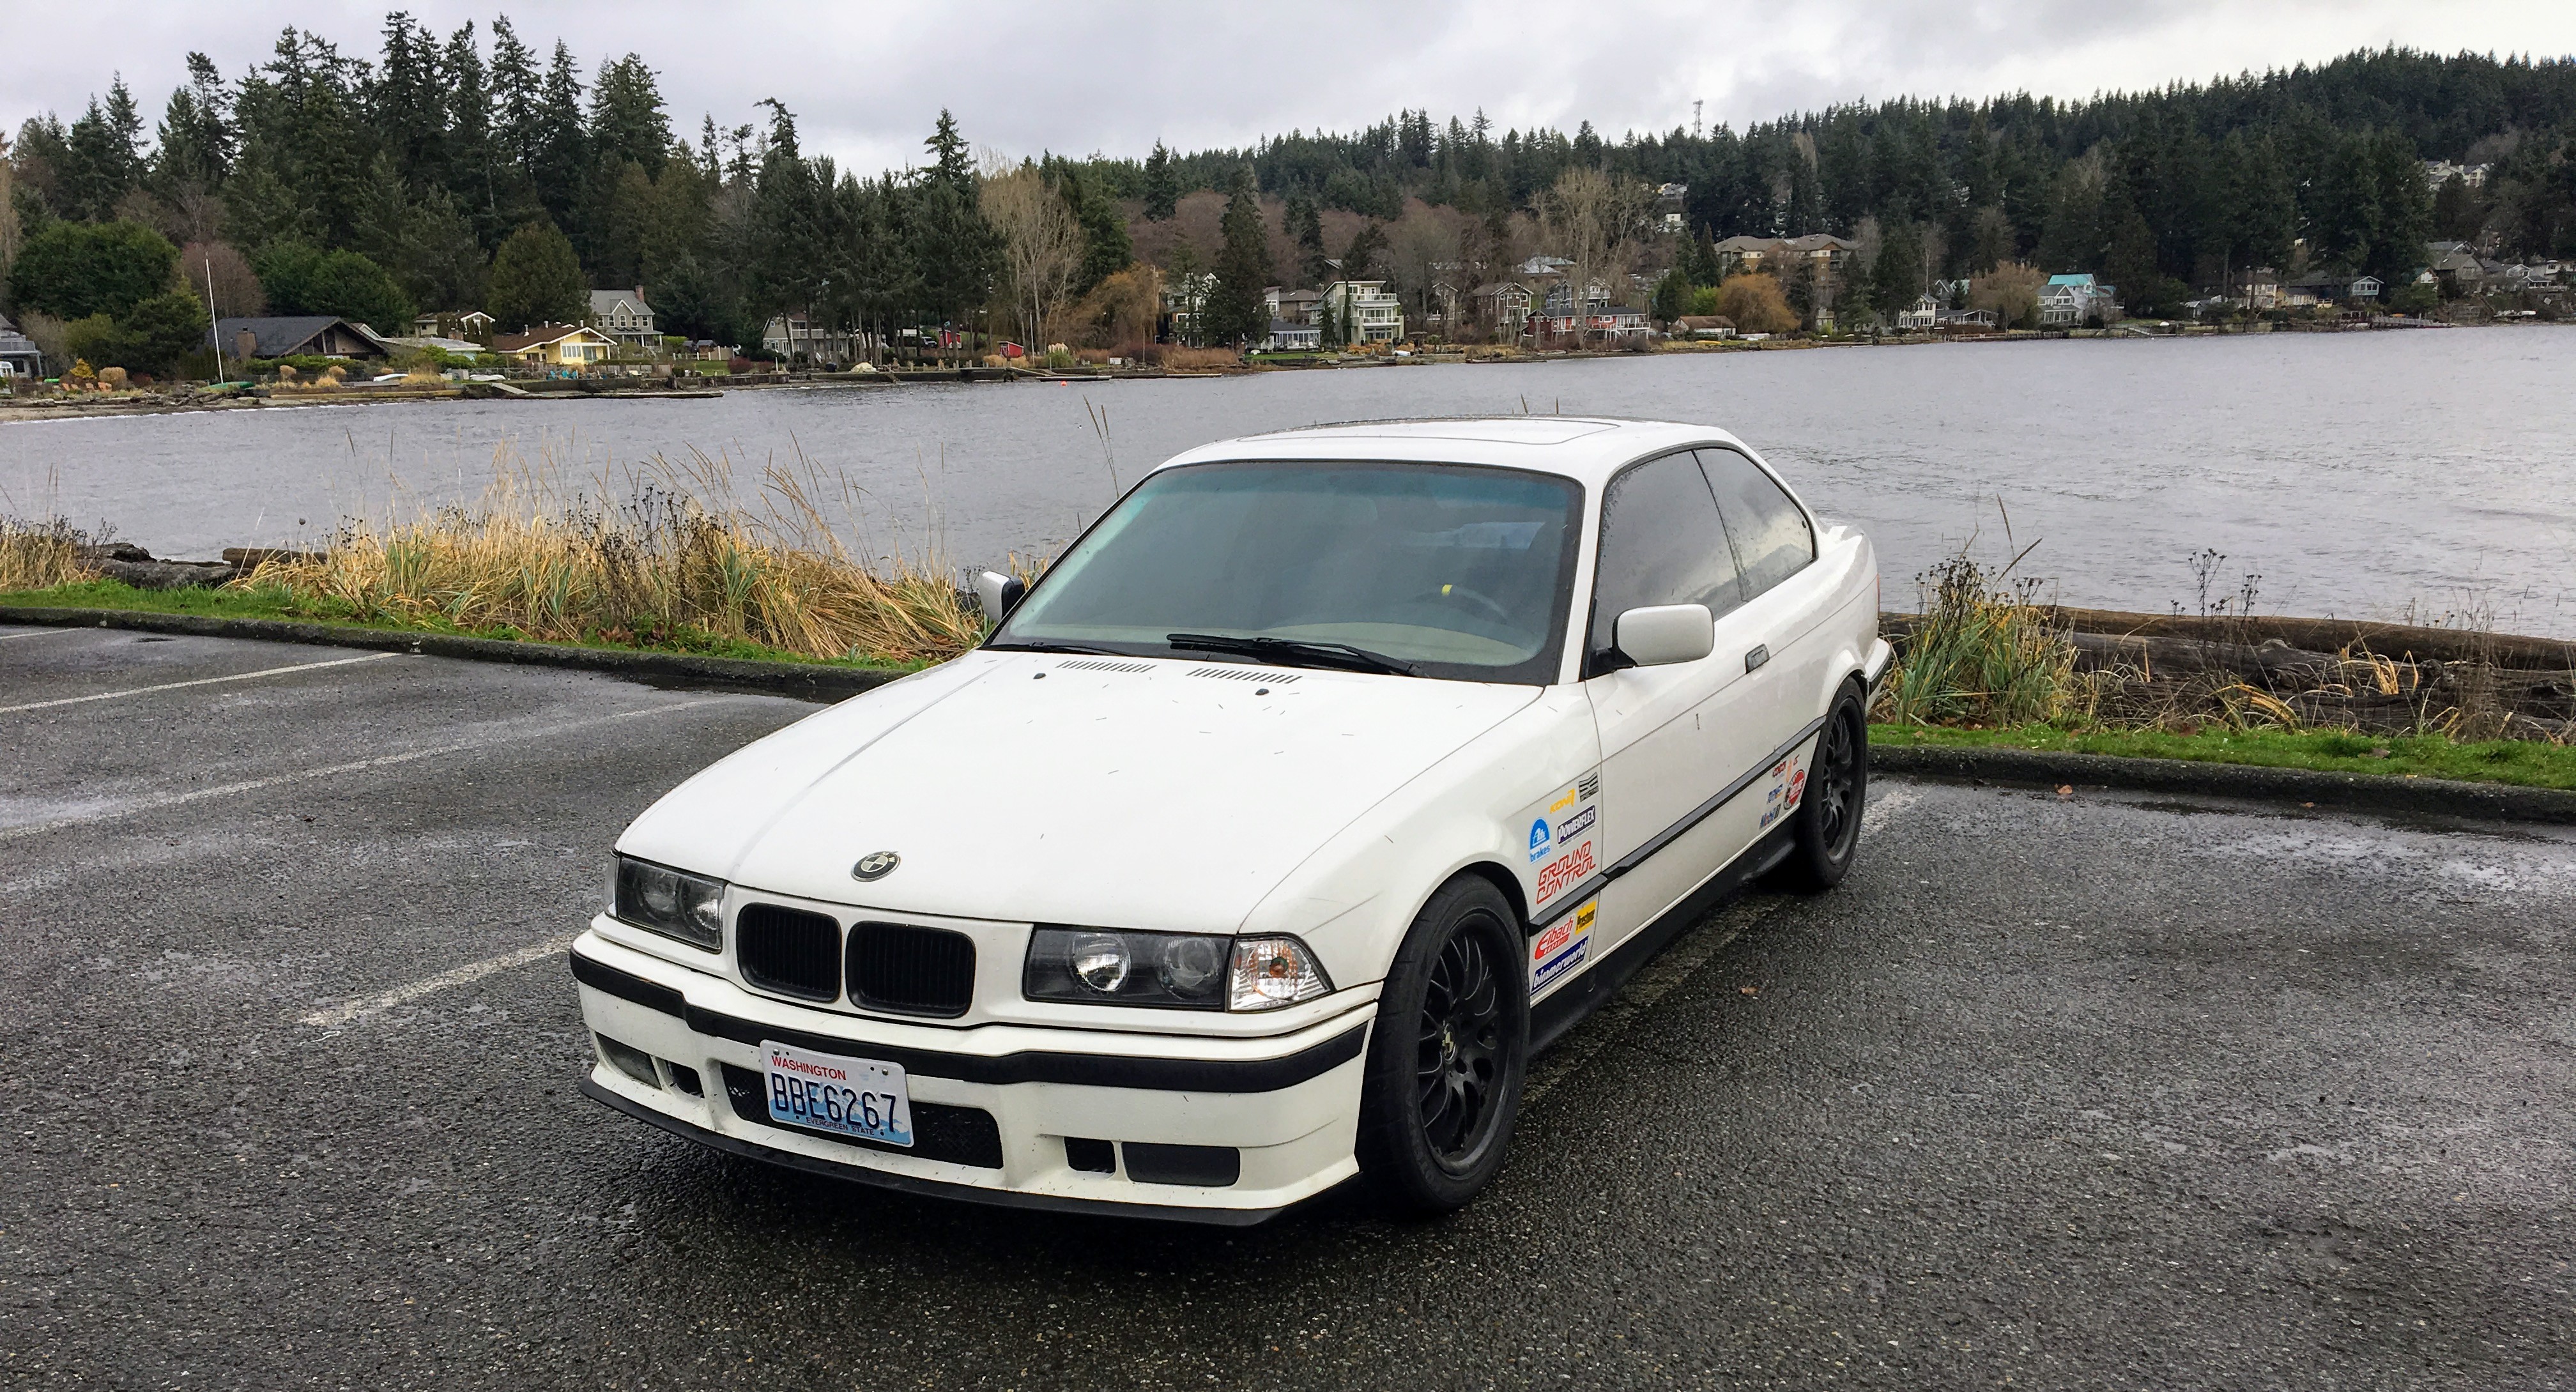 Turning My Bmw E36 Into More Of A Dedicated Race Car